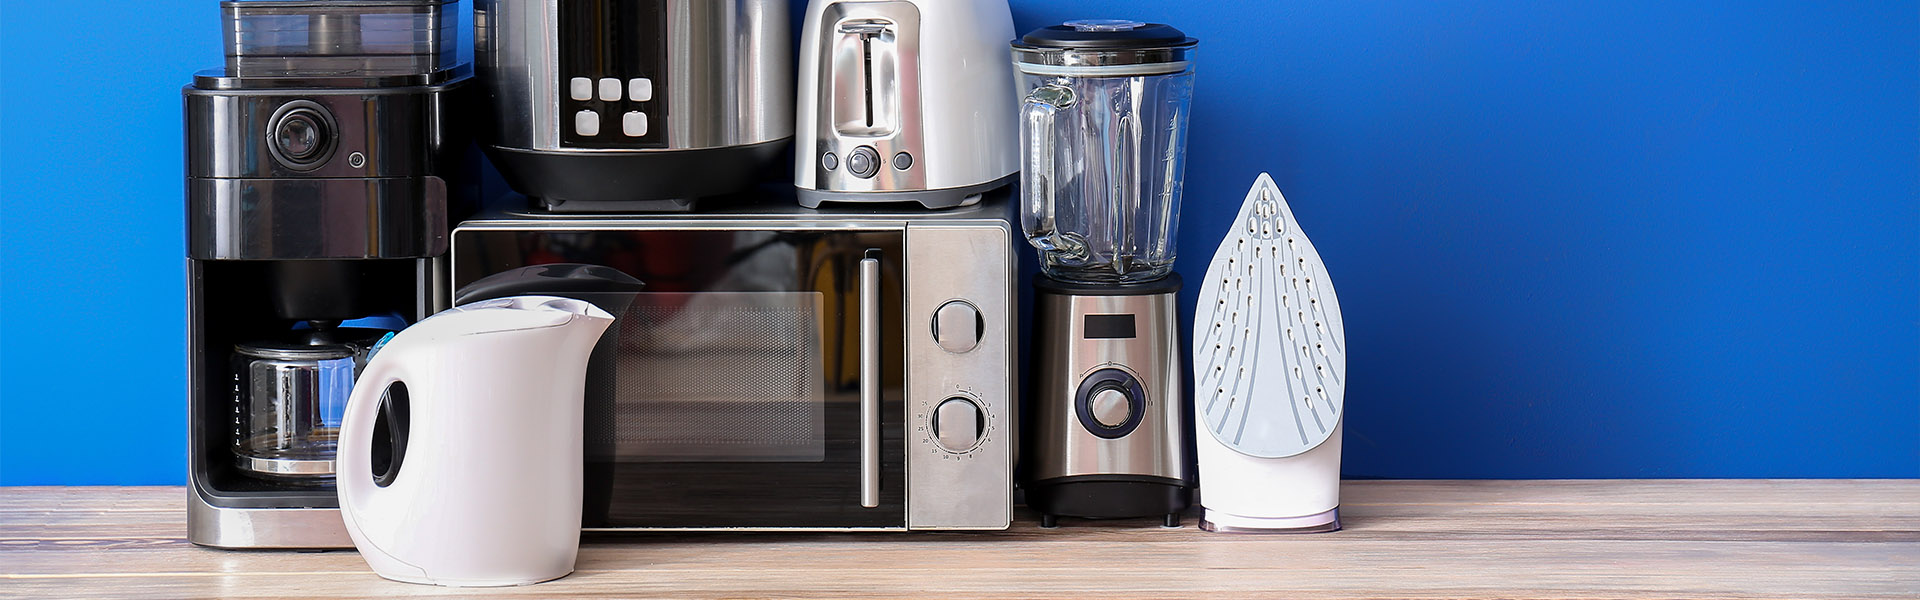 Factory Seconds Appliances vs. Second-Hand Appliances: What’s the Difference?